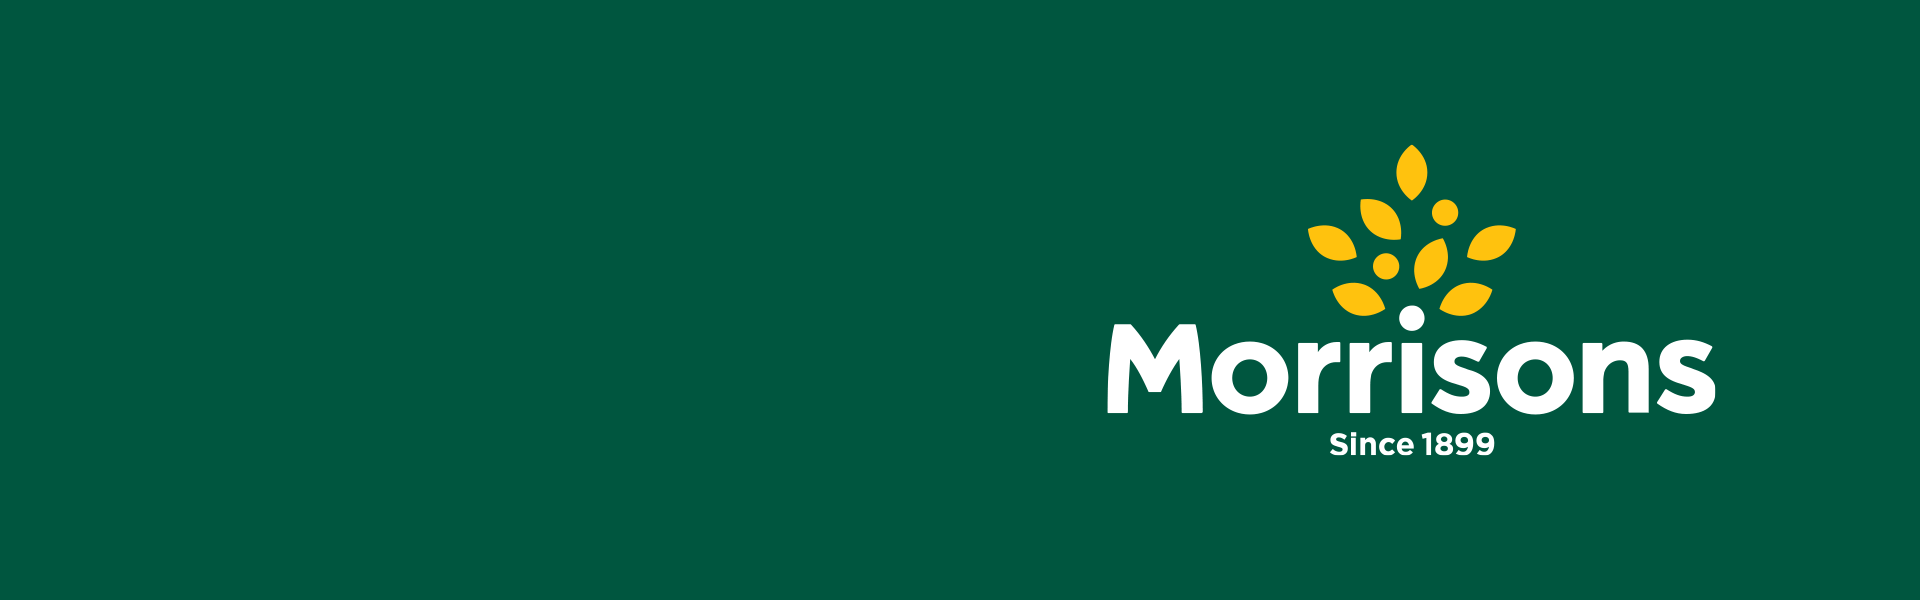 Morrisons Careers | Kingdom Services Group